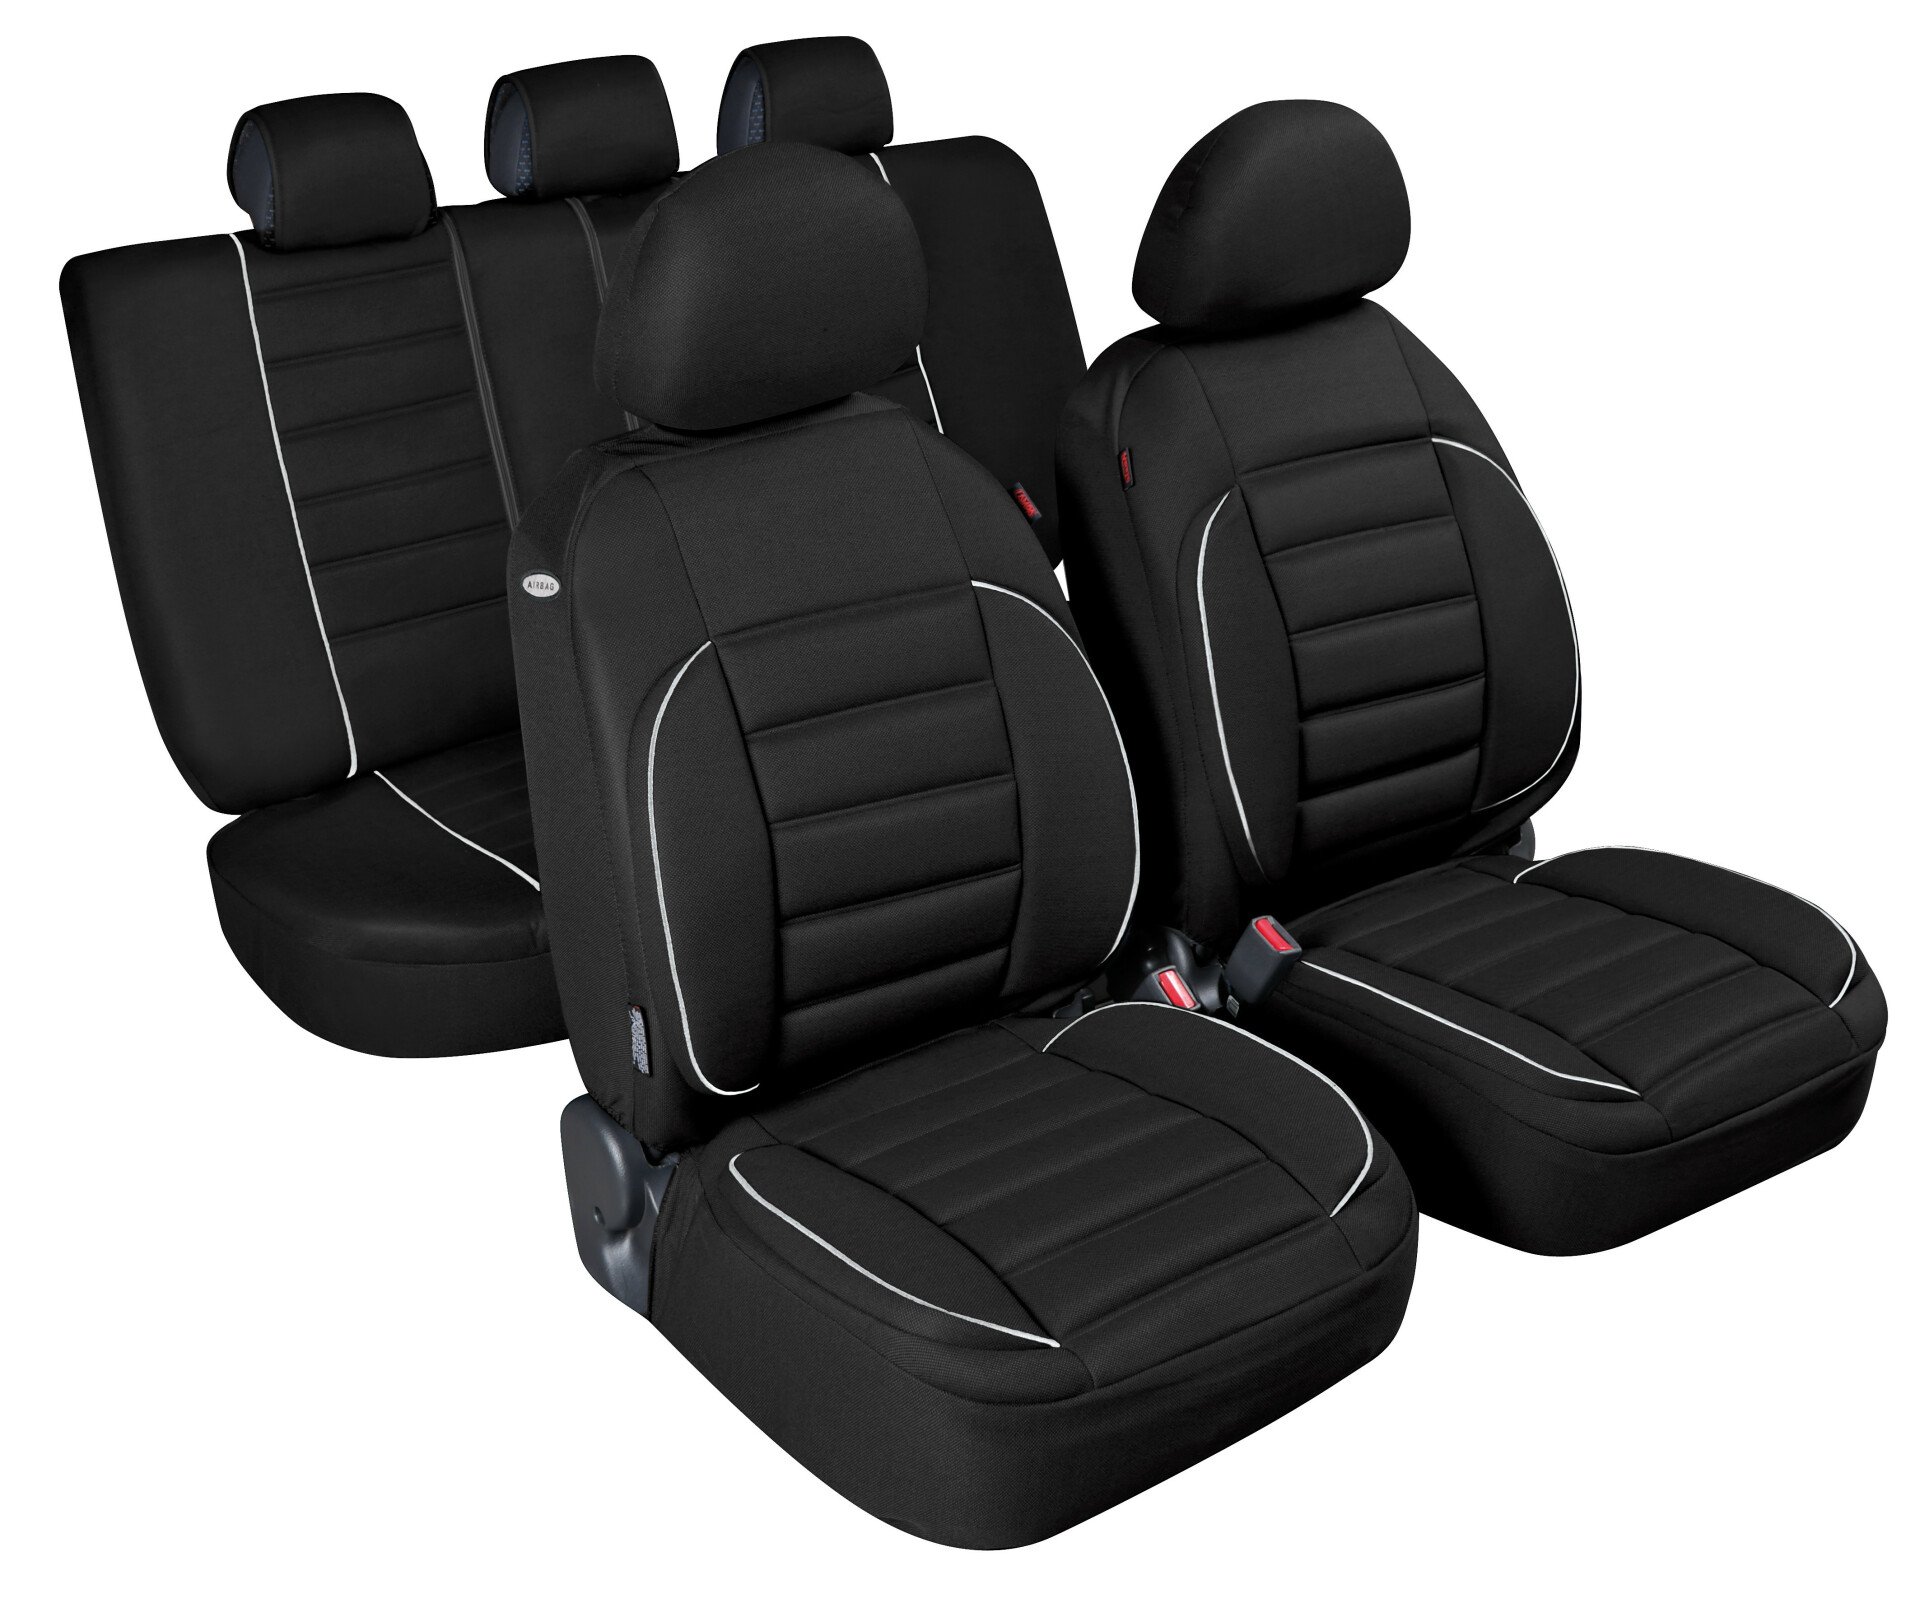 De-Luxe Sport Edition, high-quality seat cover set - Black thumb